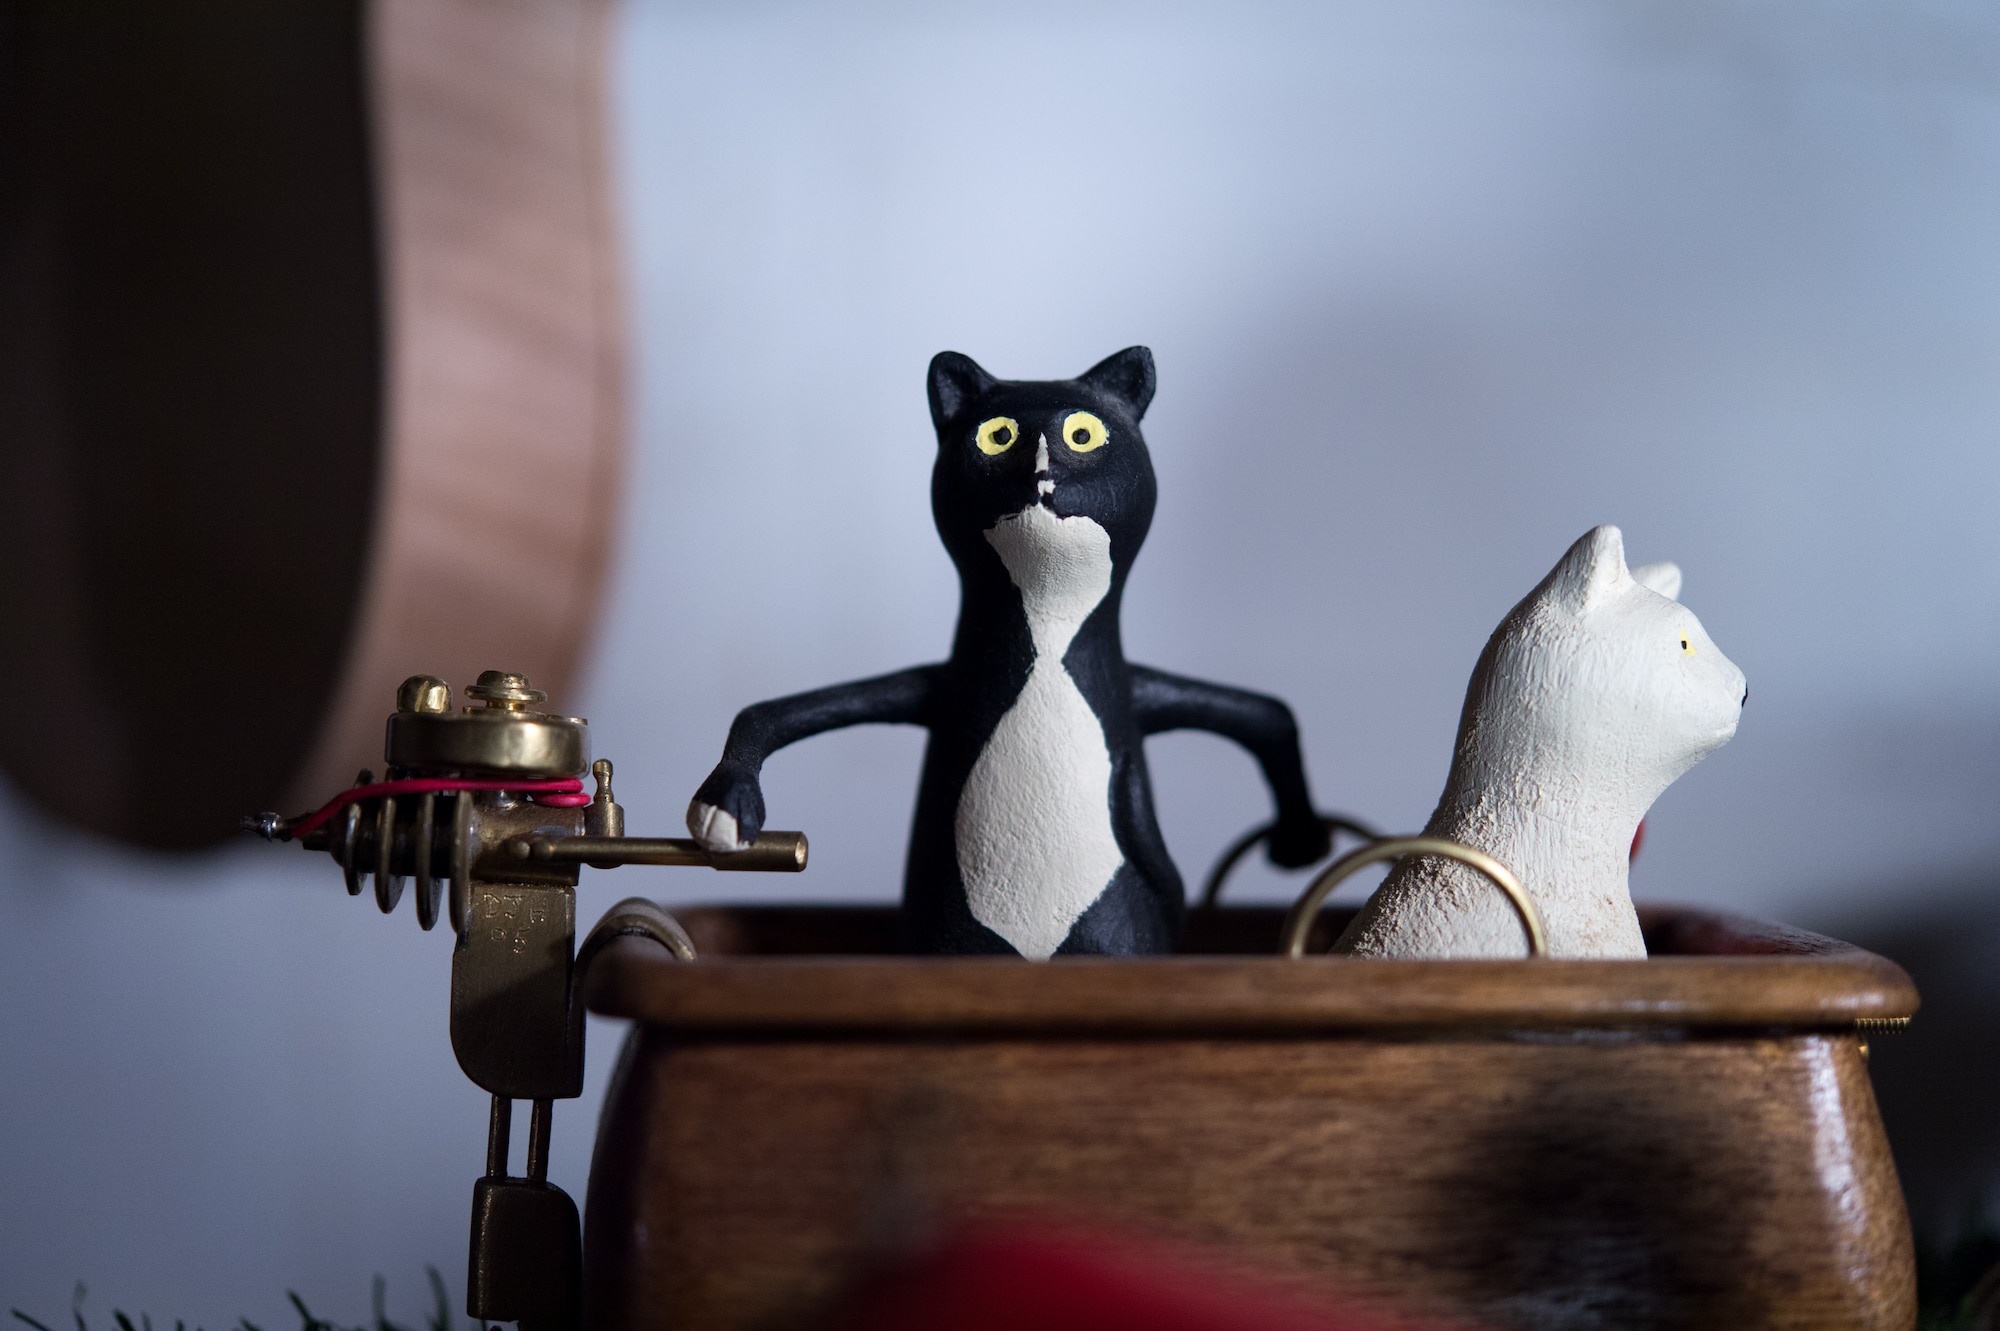 A mechanical folk art creation by retired U.S. Air Force Master Sgt. Daniel Holmes, depicts some of his beloved cats at his home in Lowell, Mass., Jun. 1, 2018. Holmes utilizes his art to teach Airmen various electronic and mechanical skills not taught during their technical training in order for them to maintain 1960's era technology used at the Sagamore Hill Solar Observatory of the 2nd Weather Squadron, Det. 2, in Hamilton, Mass. (U.S. Air Force photo by J.M. Eddins Jr.)